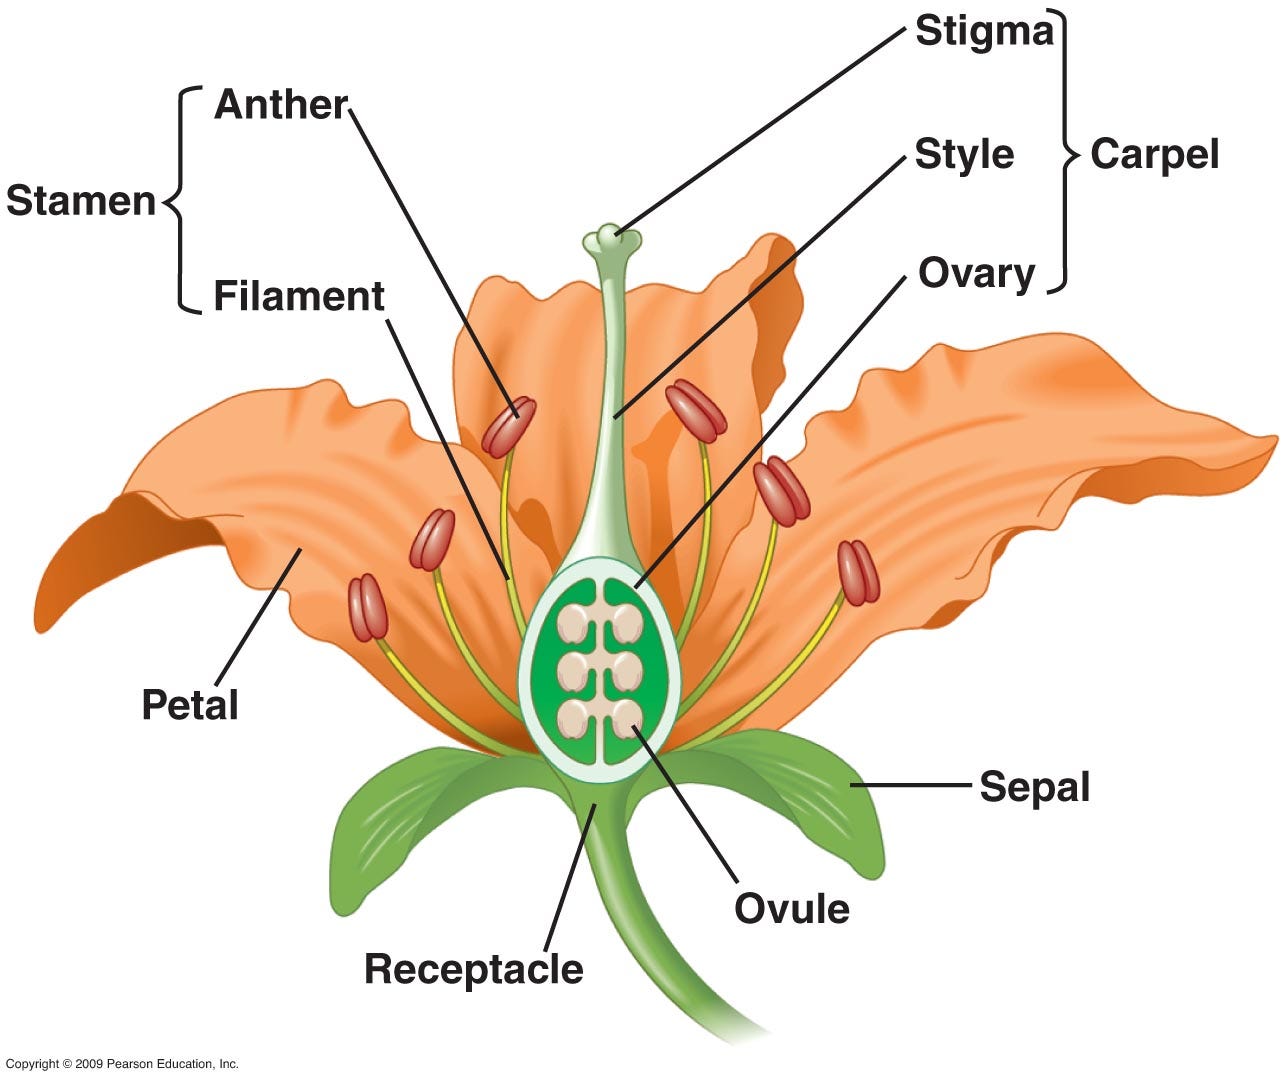 What organ in angiosperms is responsible for the reproductive function of  the plant? | Socratic